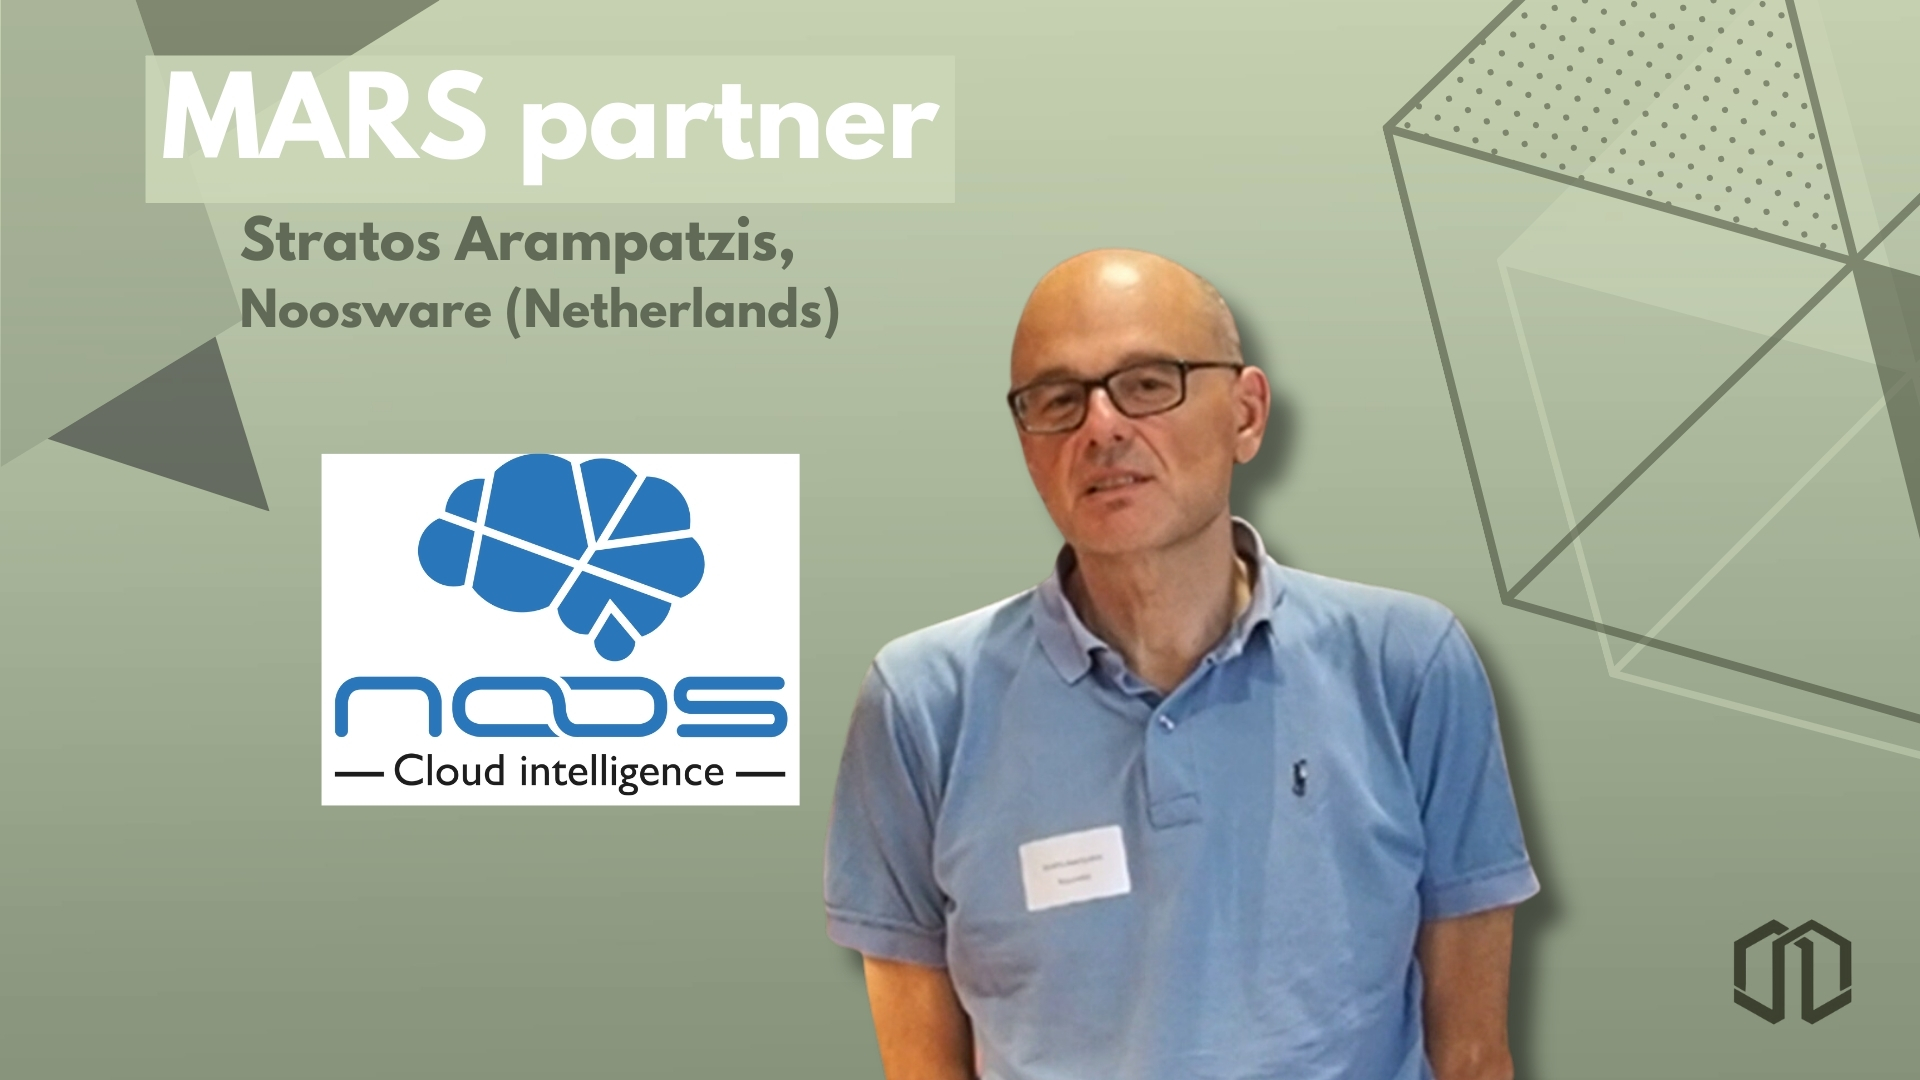 Meet our partner: Video interview with Stratos Arampatzis (Noosware BV)